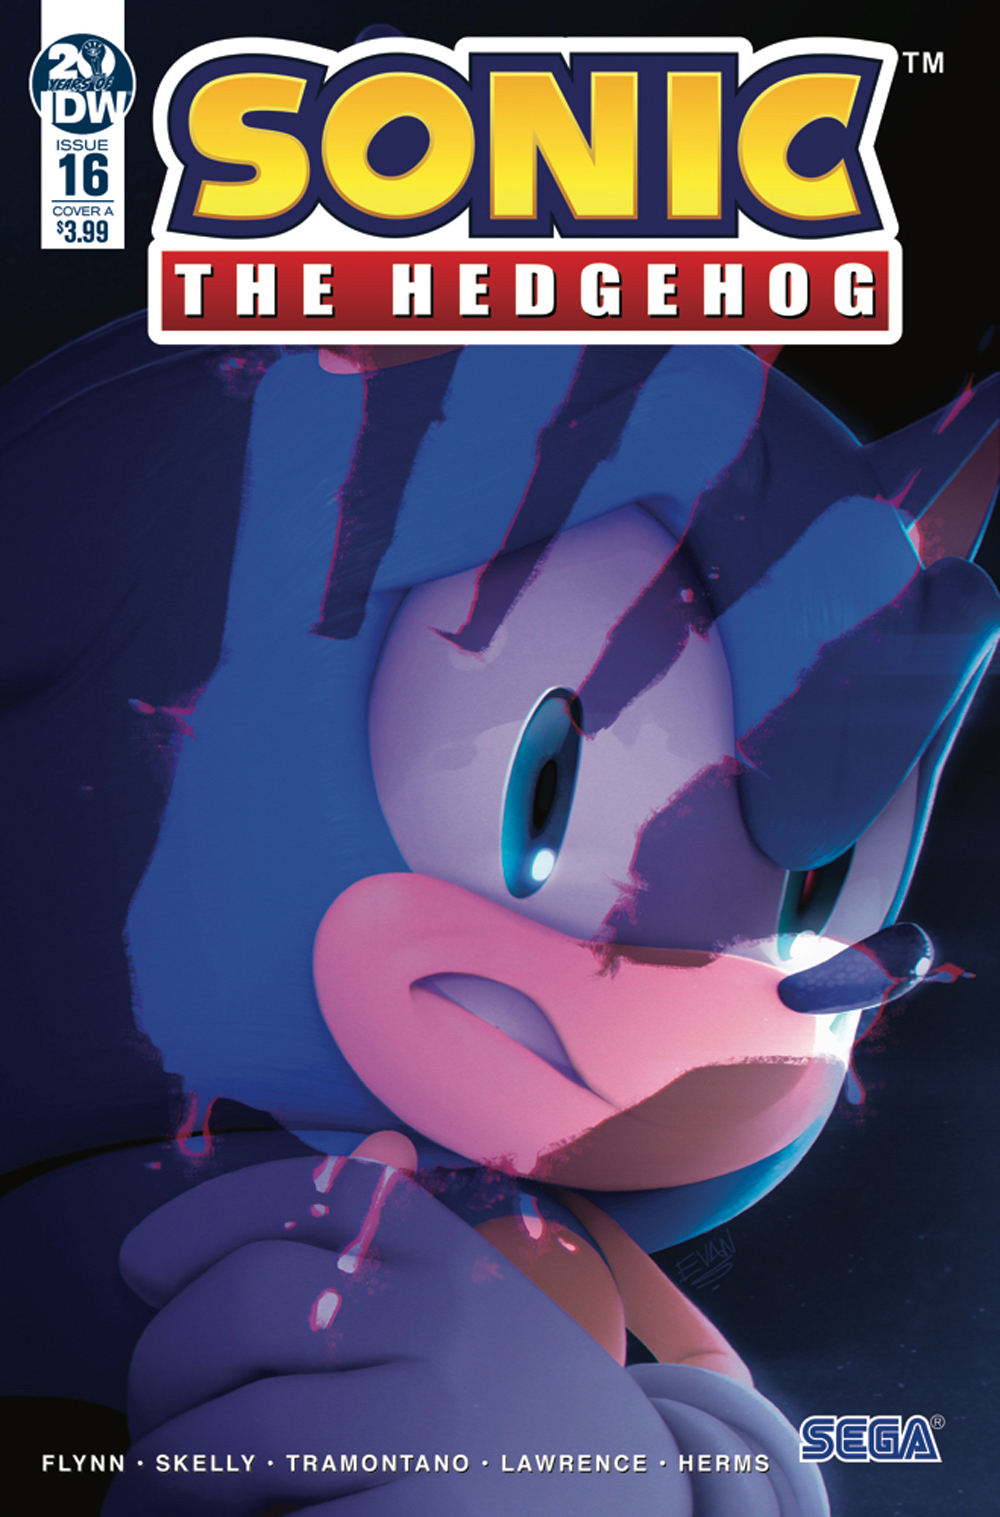 Sonic the Hedgehog (IDW) - The Restoration / Characters - TV Tropes